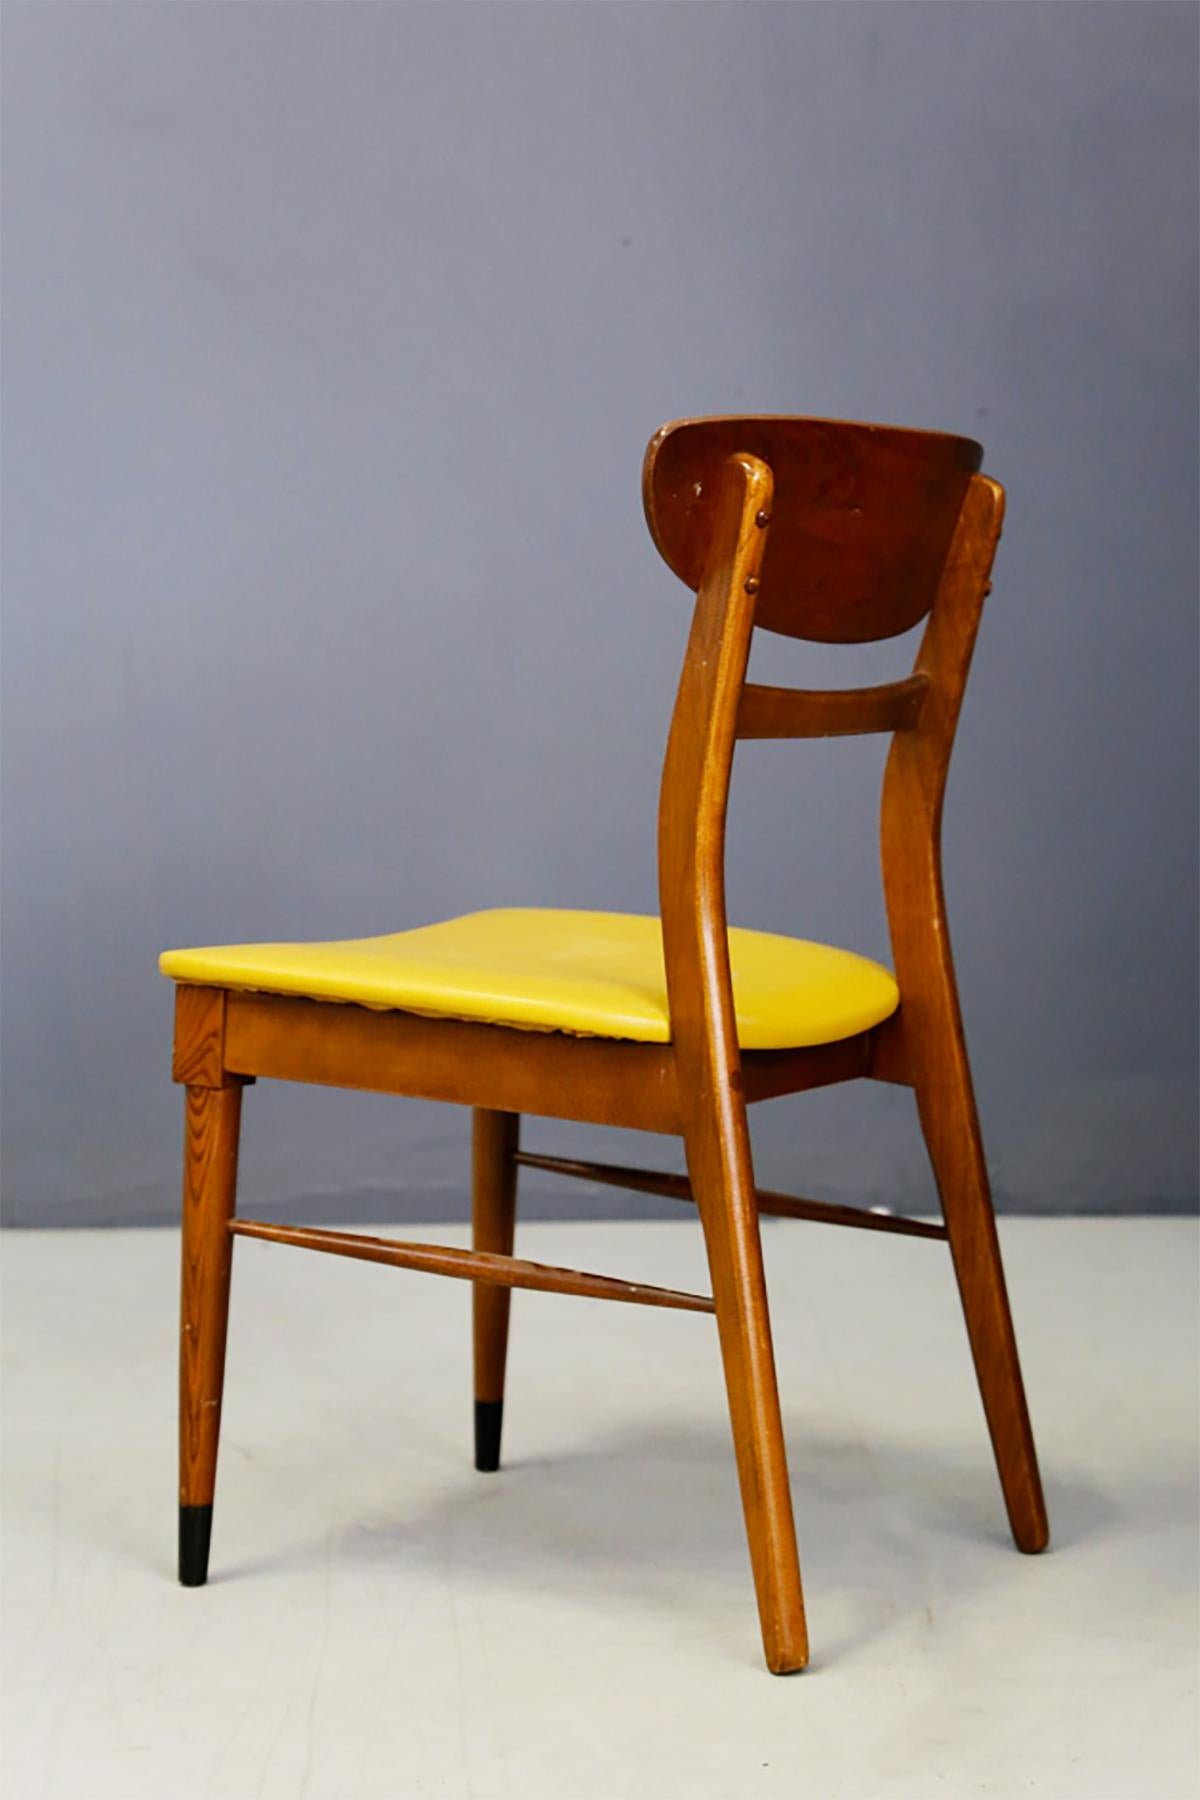 Mid-20th Century Set of 4 American Chairs in Wood and Leather, 1950s